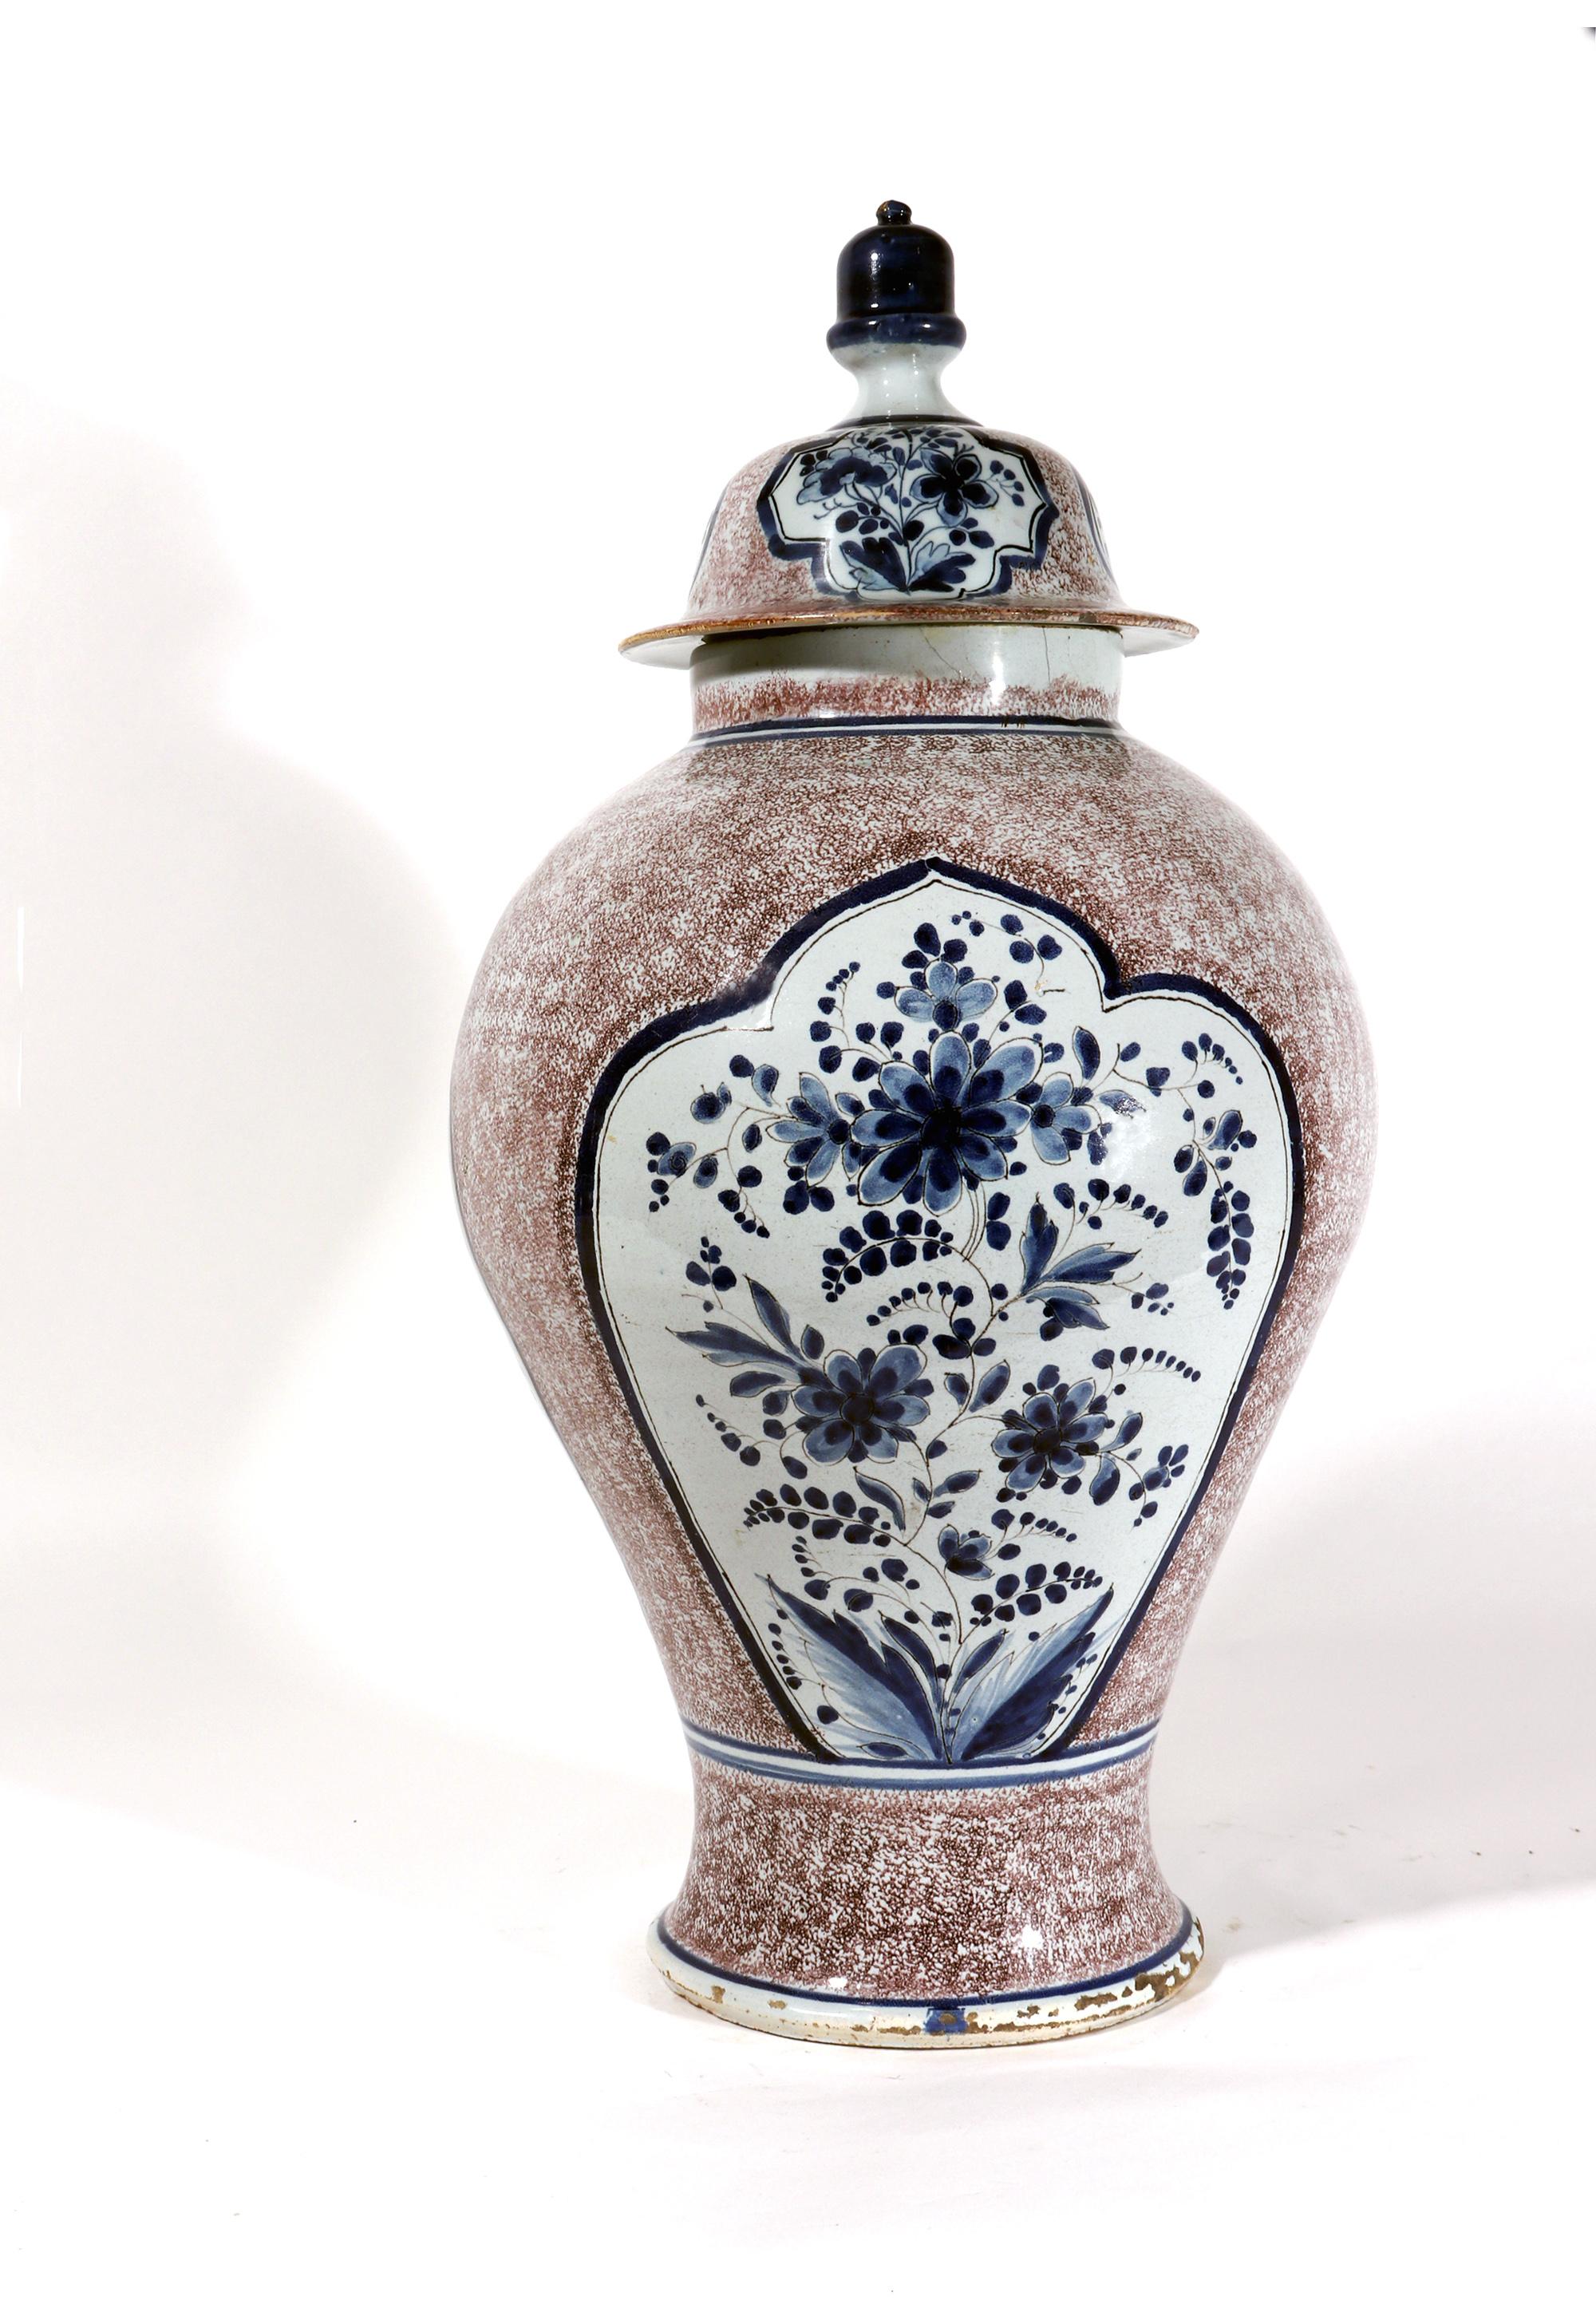 Massive German Faience or Dutch Delft Powdered manganese & blue vase & cover,
Mid-18th Century,

The German faience powered manganese-ground vase, of baluster form, has a wide shoulder with sloping sides narrowing to a flared foot. To front and back